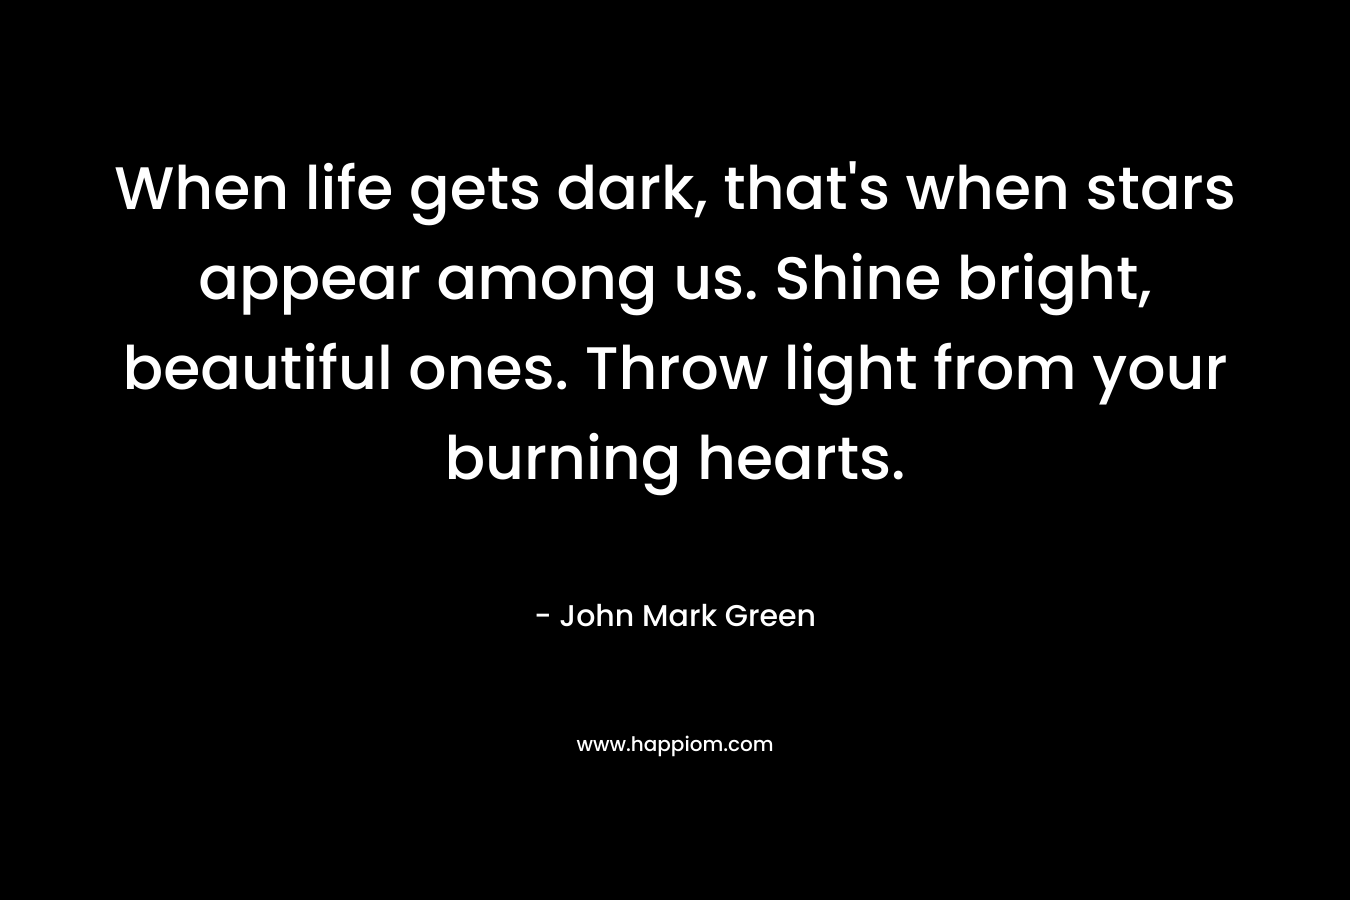 When life gets dark, that's when stars appear among us. Shine bright, beautiful ones. Throw light from your burning hearts.